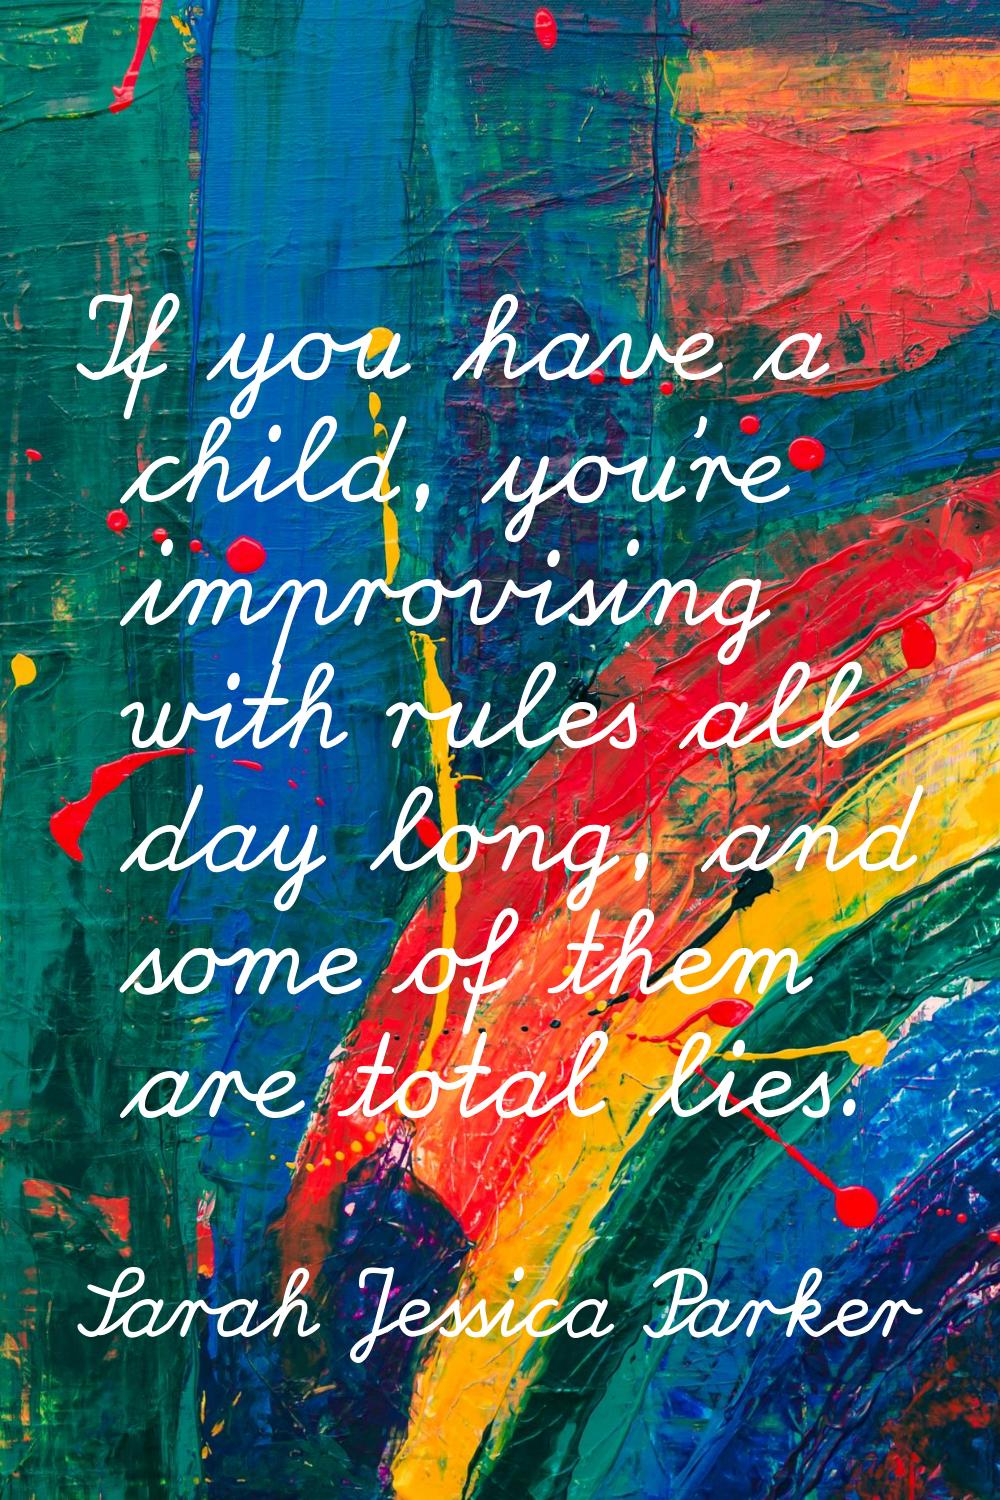 If you have a child, you're improvising with rules all day long, and some of them are total lies.